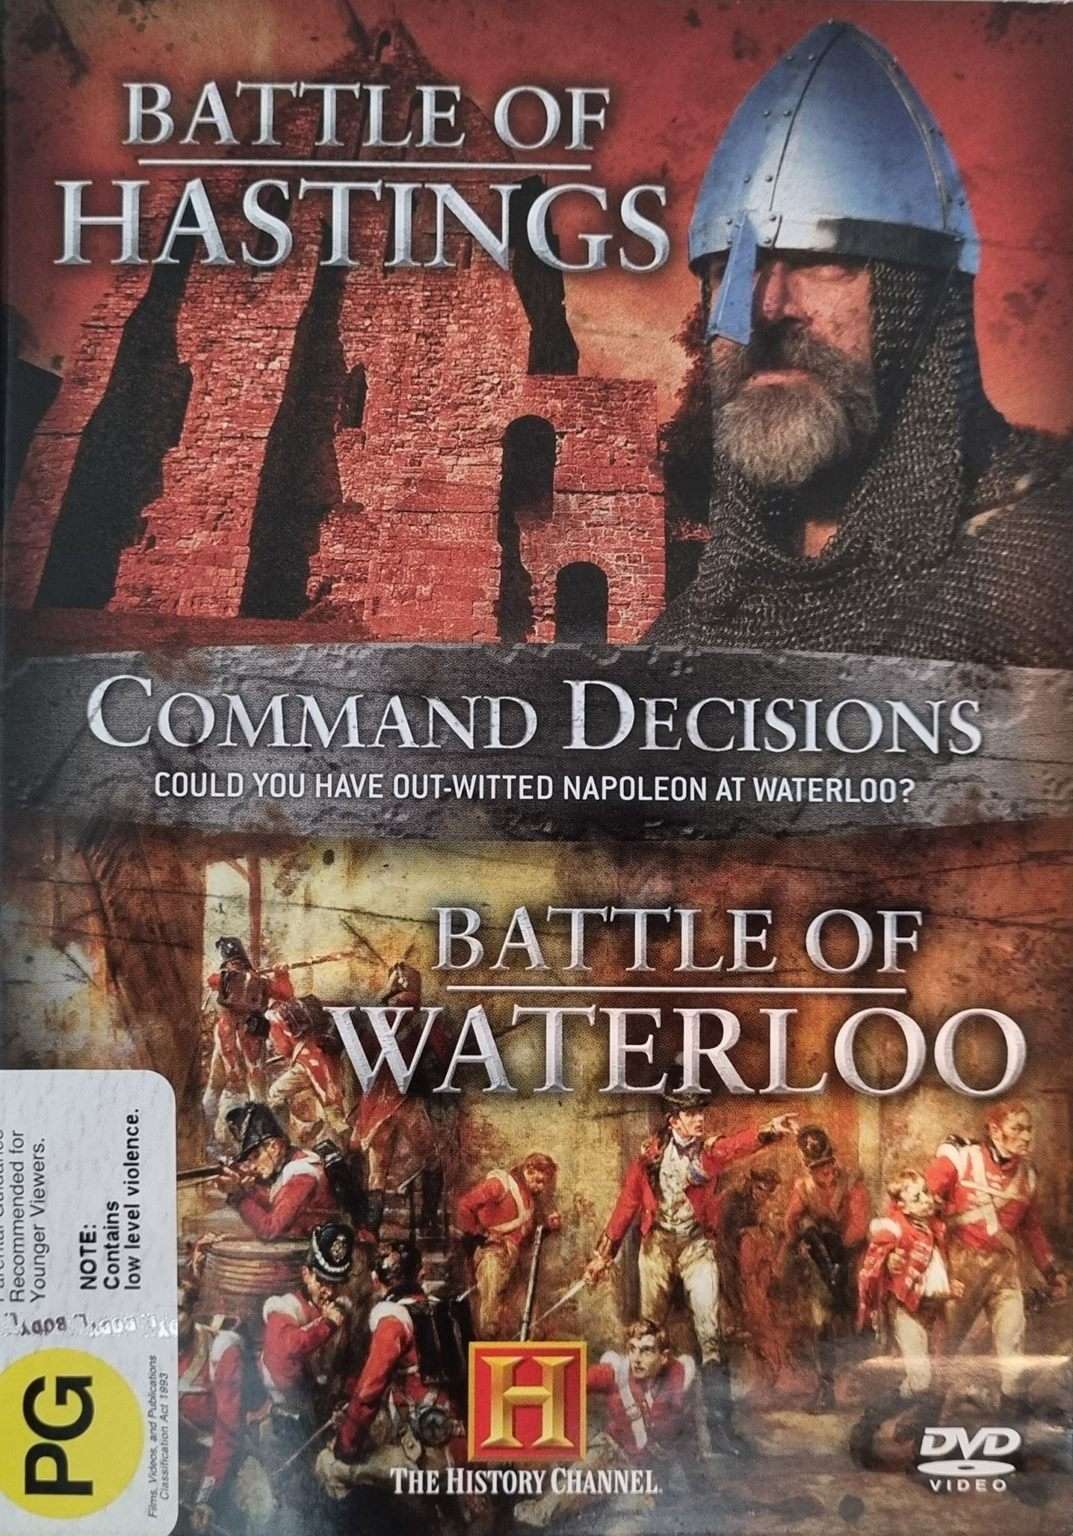 Command Decisions: Battle of Hastings / Battle of Waterloo